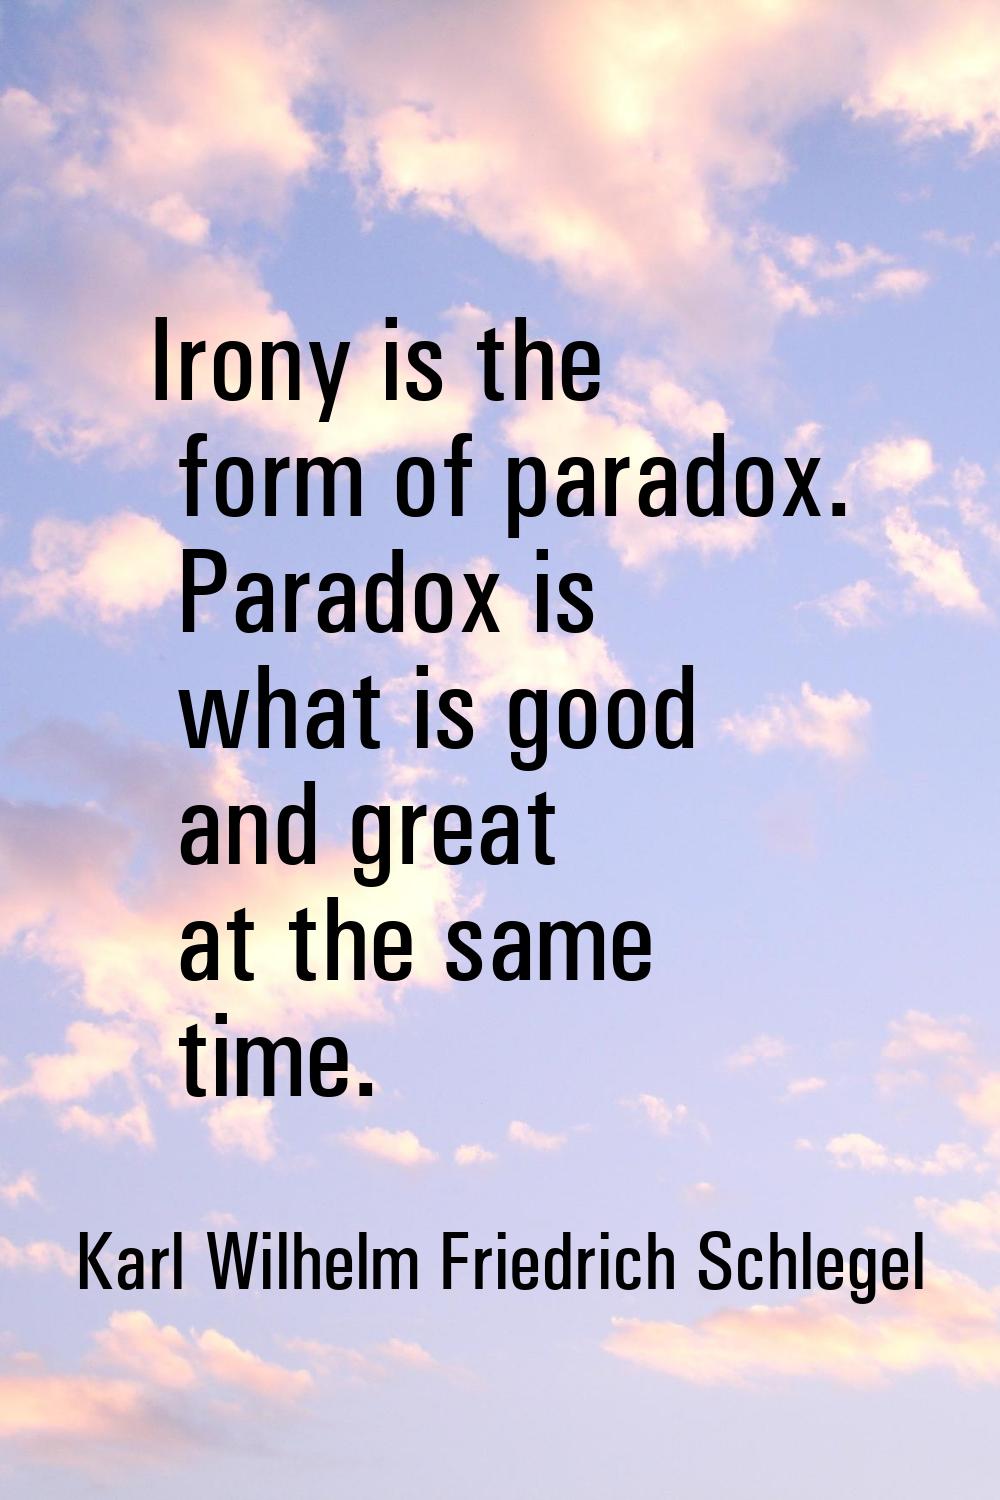 Irony is the form of paradox. Paradox is what is good and great at the same time.